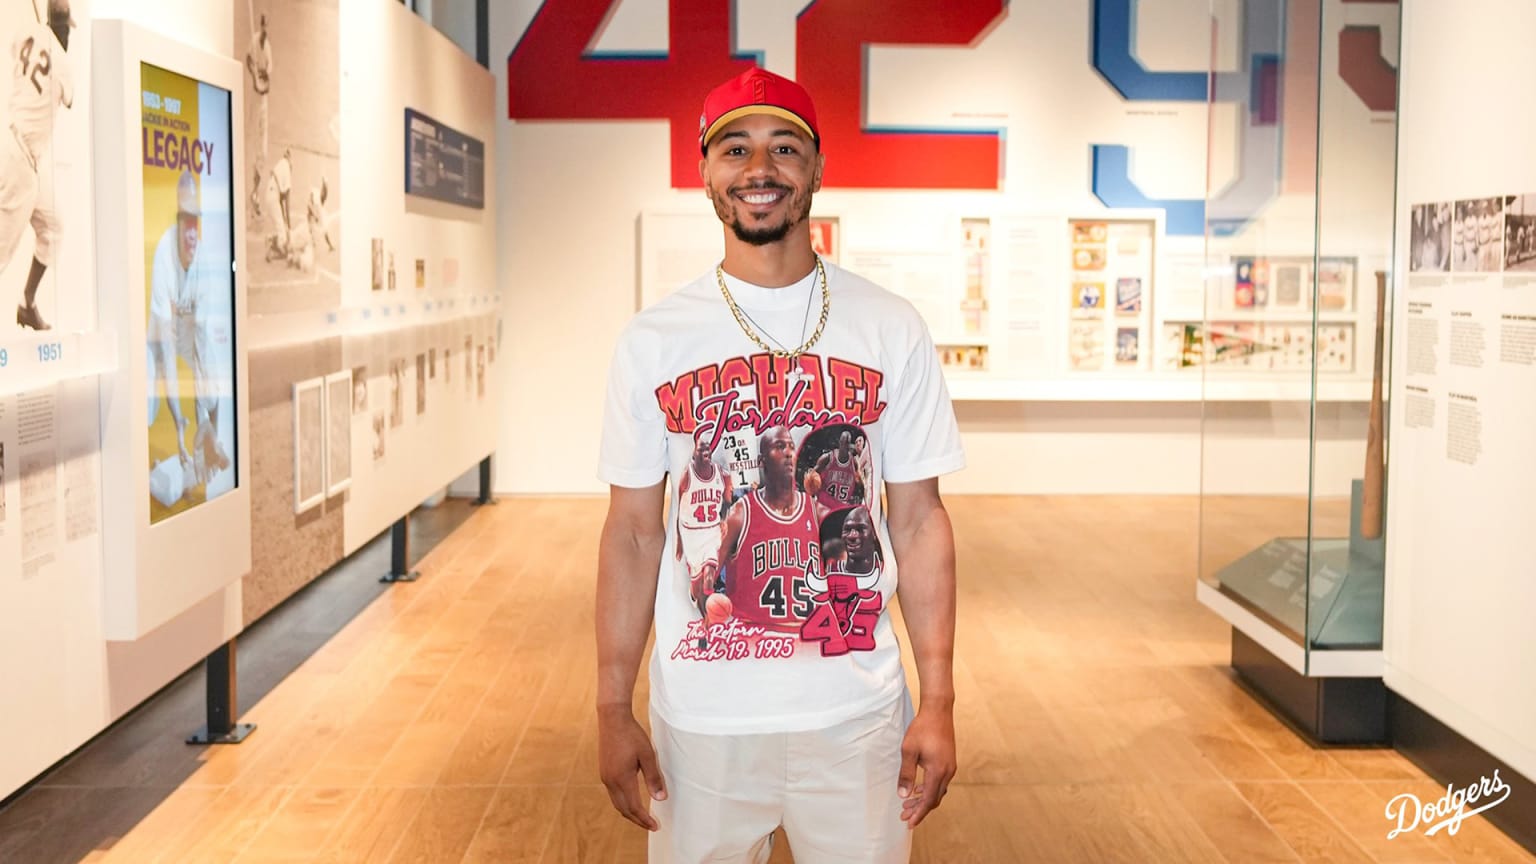 Dodgers star Mookie Betts at the Jackie Robinson museum